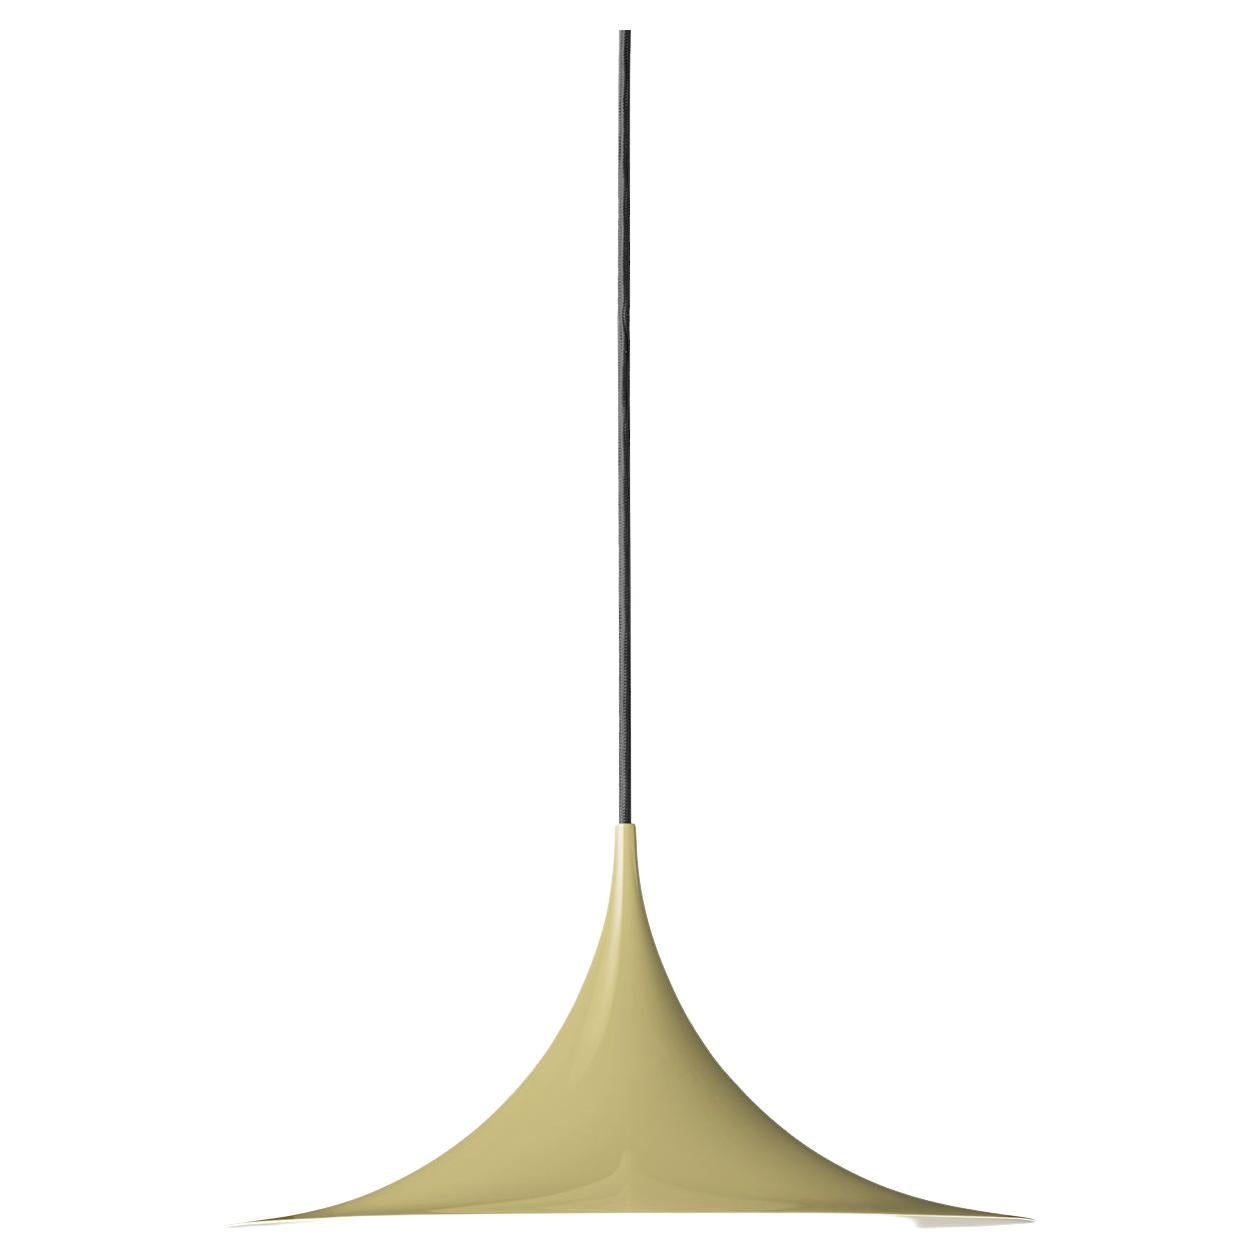 The Semi pendant is a unique pendant lamp, based on two quarter-circles put together, back-to-back. It’s distinctive arch-shaped, enamelled metal shade creates a diffused, cone-shaped light, ideal over a dining table or kitchen work surface. With